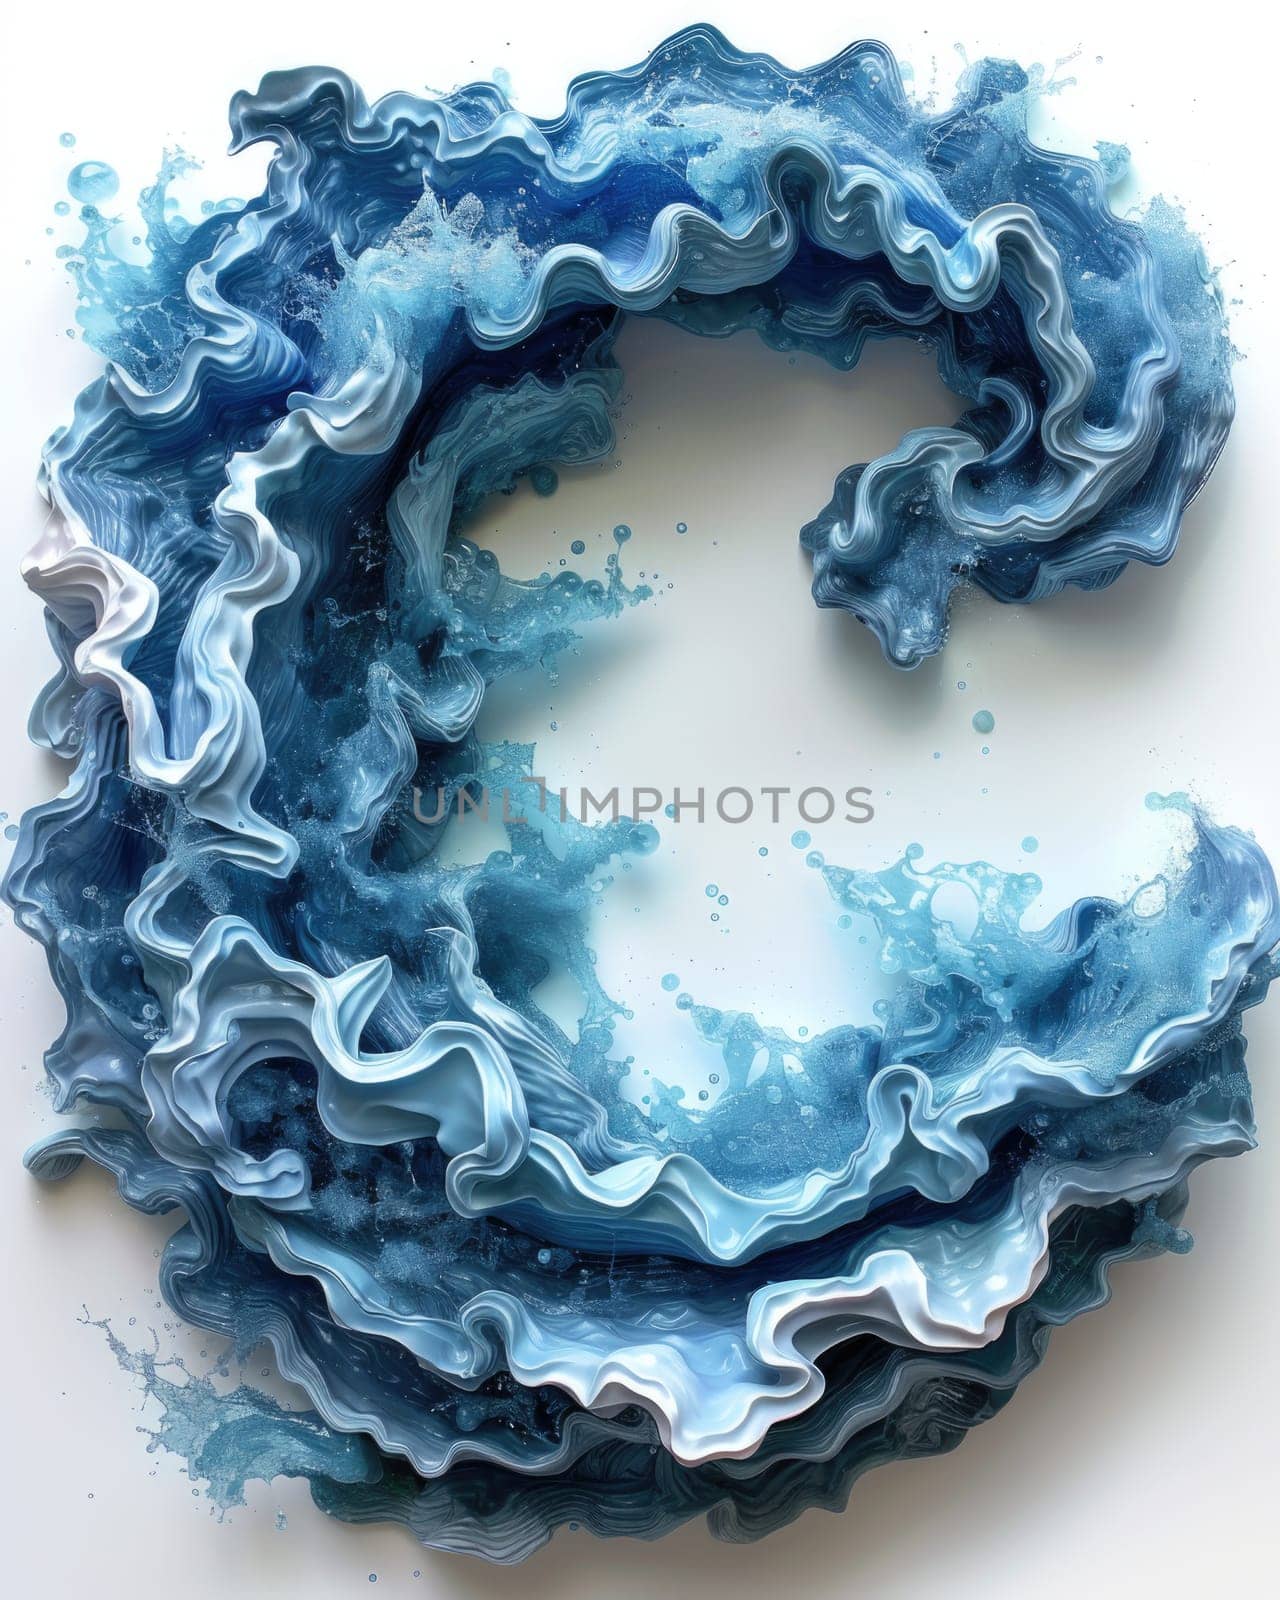 A detailed view of a paper art piece featuring intricately crafted letters shaped like waves and ocean elements.